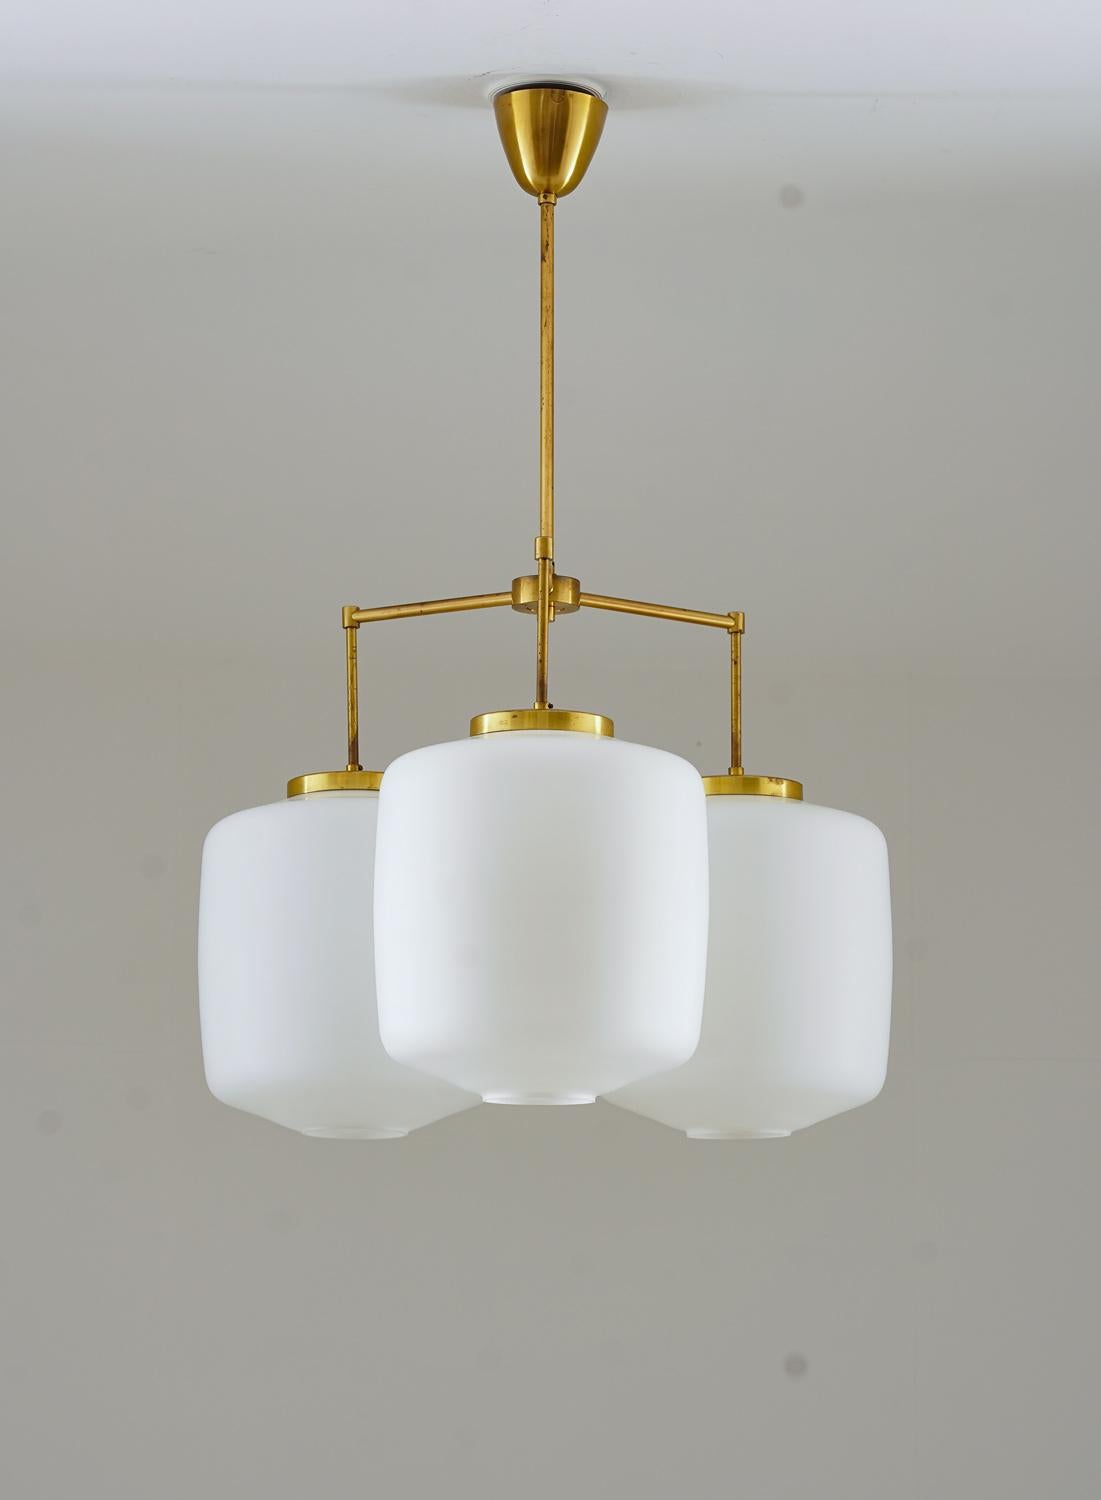 Rare chandelier by Høvik lys, Norway.
This chandelier consists of large opaline glas shades, supported by brass rods that are connected in the center.

Each shade measures 30x33cm (11,8